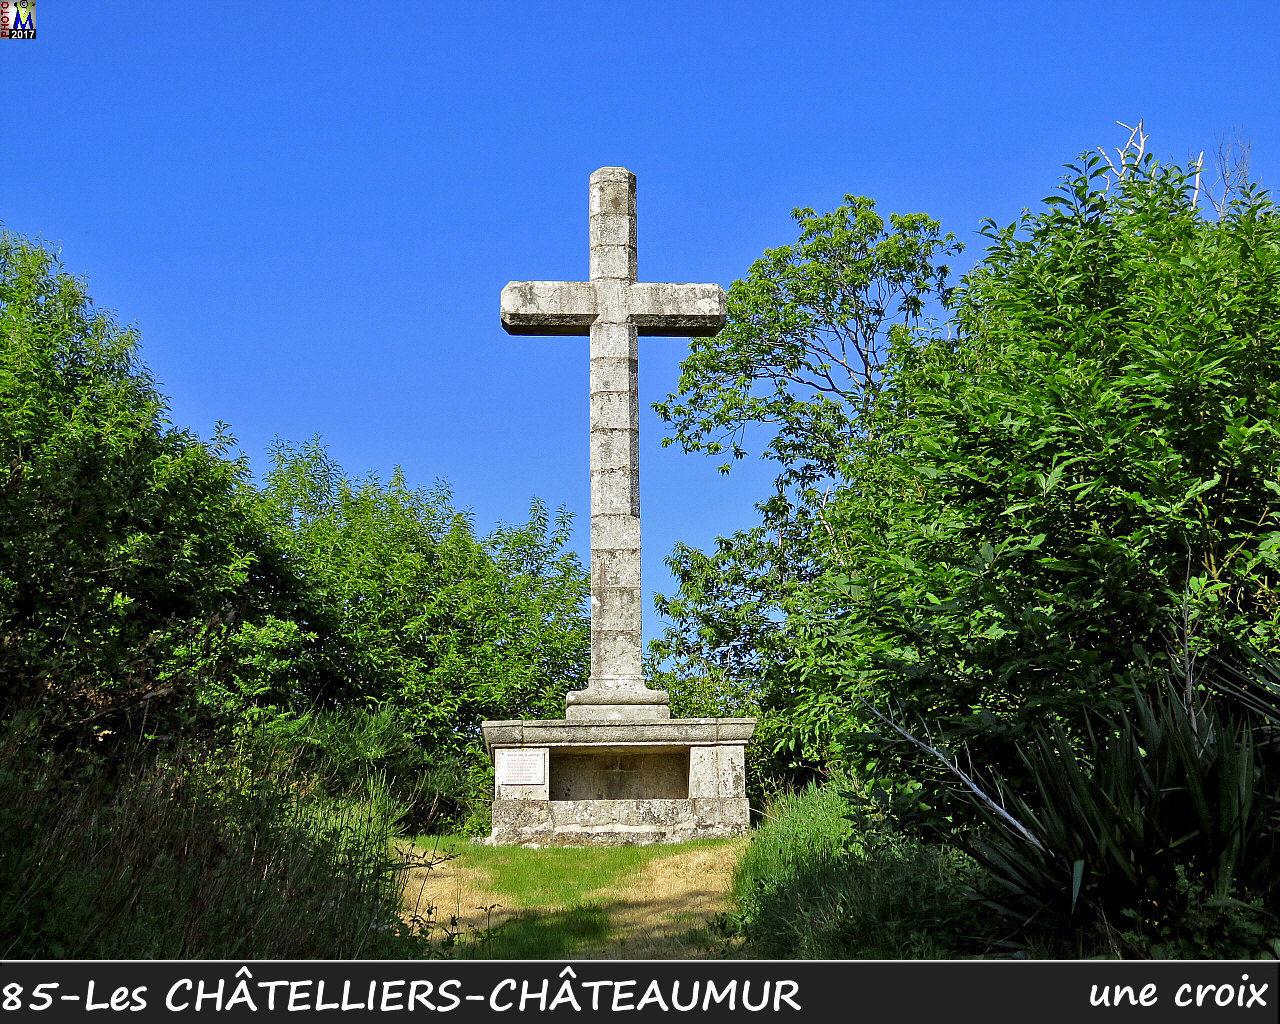 85CHATELLIERS-CHATEAUMUR_croix_1000.jpg